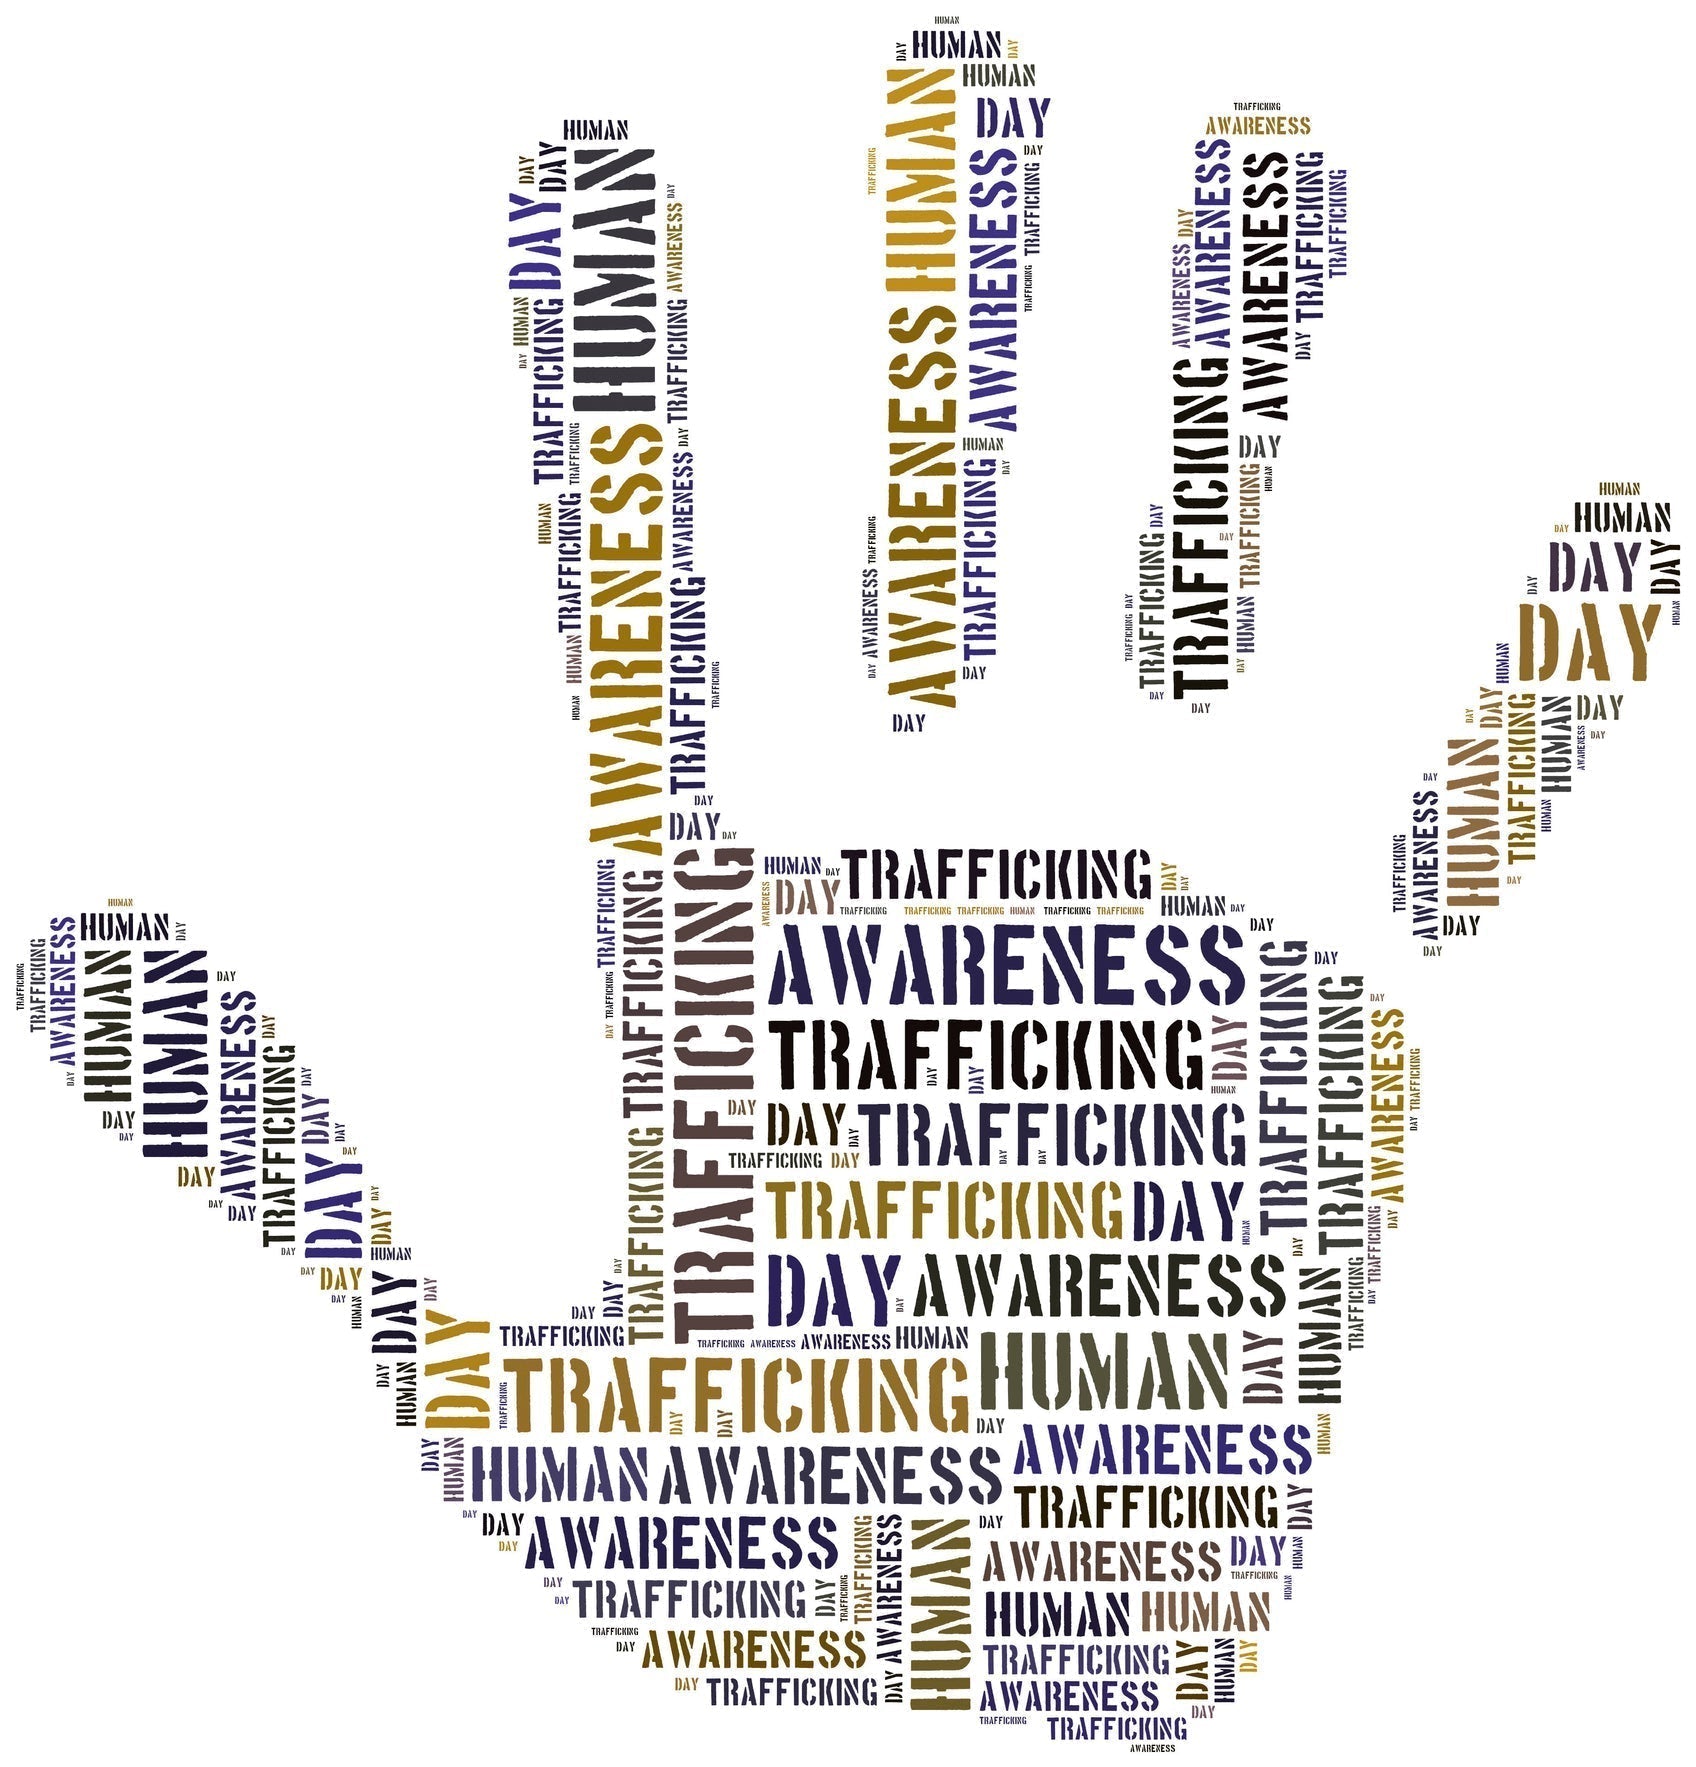 Human trafficking: How to spot it and what you can do to help - 35 Thousand